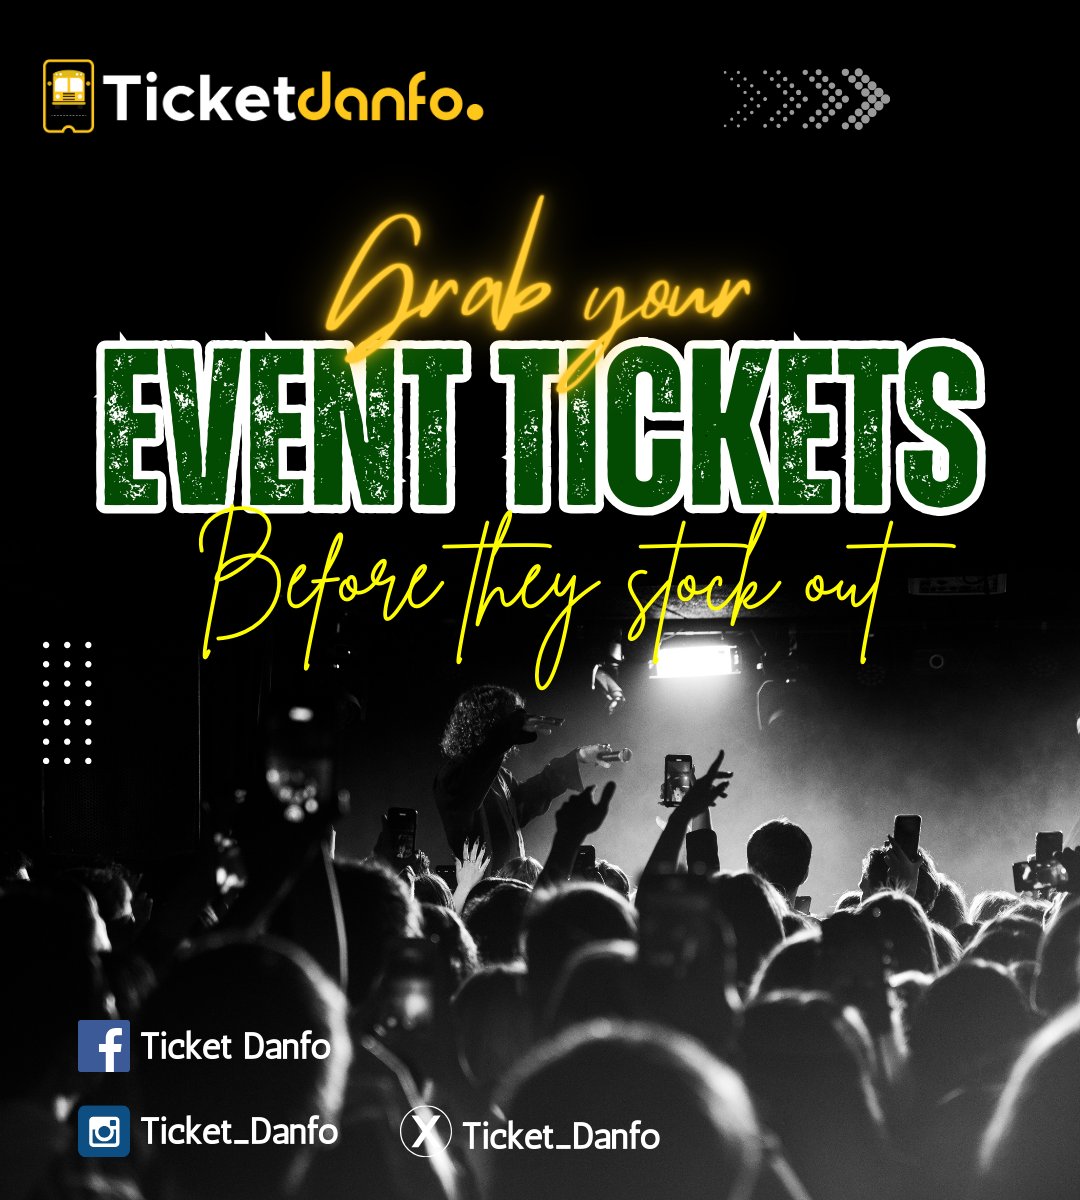 🎟️ Ready to experience the thrill of live events again? Look no further! Find the best tickets for concerts, sports games, theater shows, and more all in one place. 🌟 Don't miss out on unforgettable experiences - grab your tickets now and make memories that will last a lifetime!